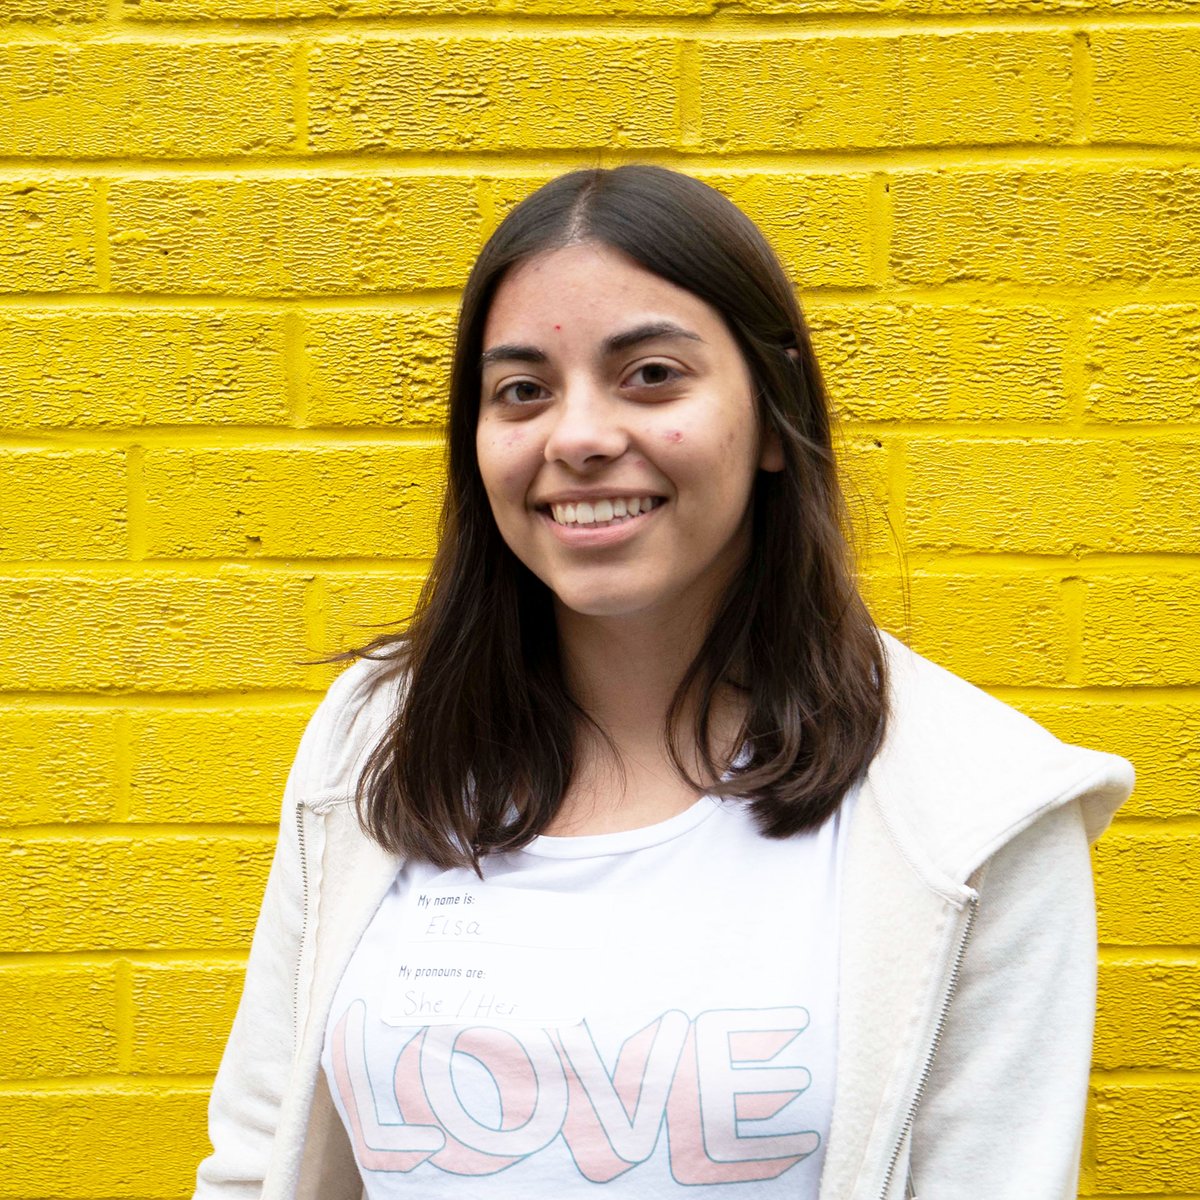 Meet Elsa, who volunteers on our Youth Panel. Elsa loves the power young people can have in using their voice to shape a brighter future for others.